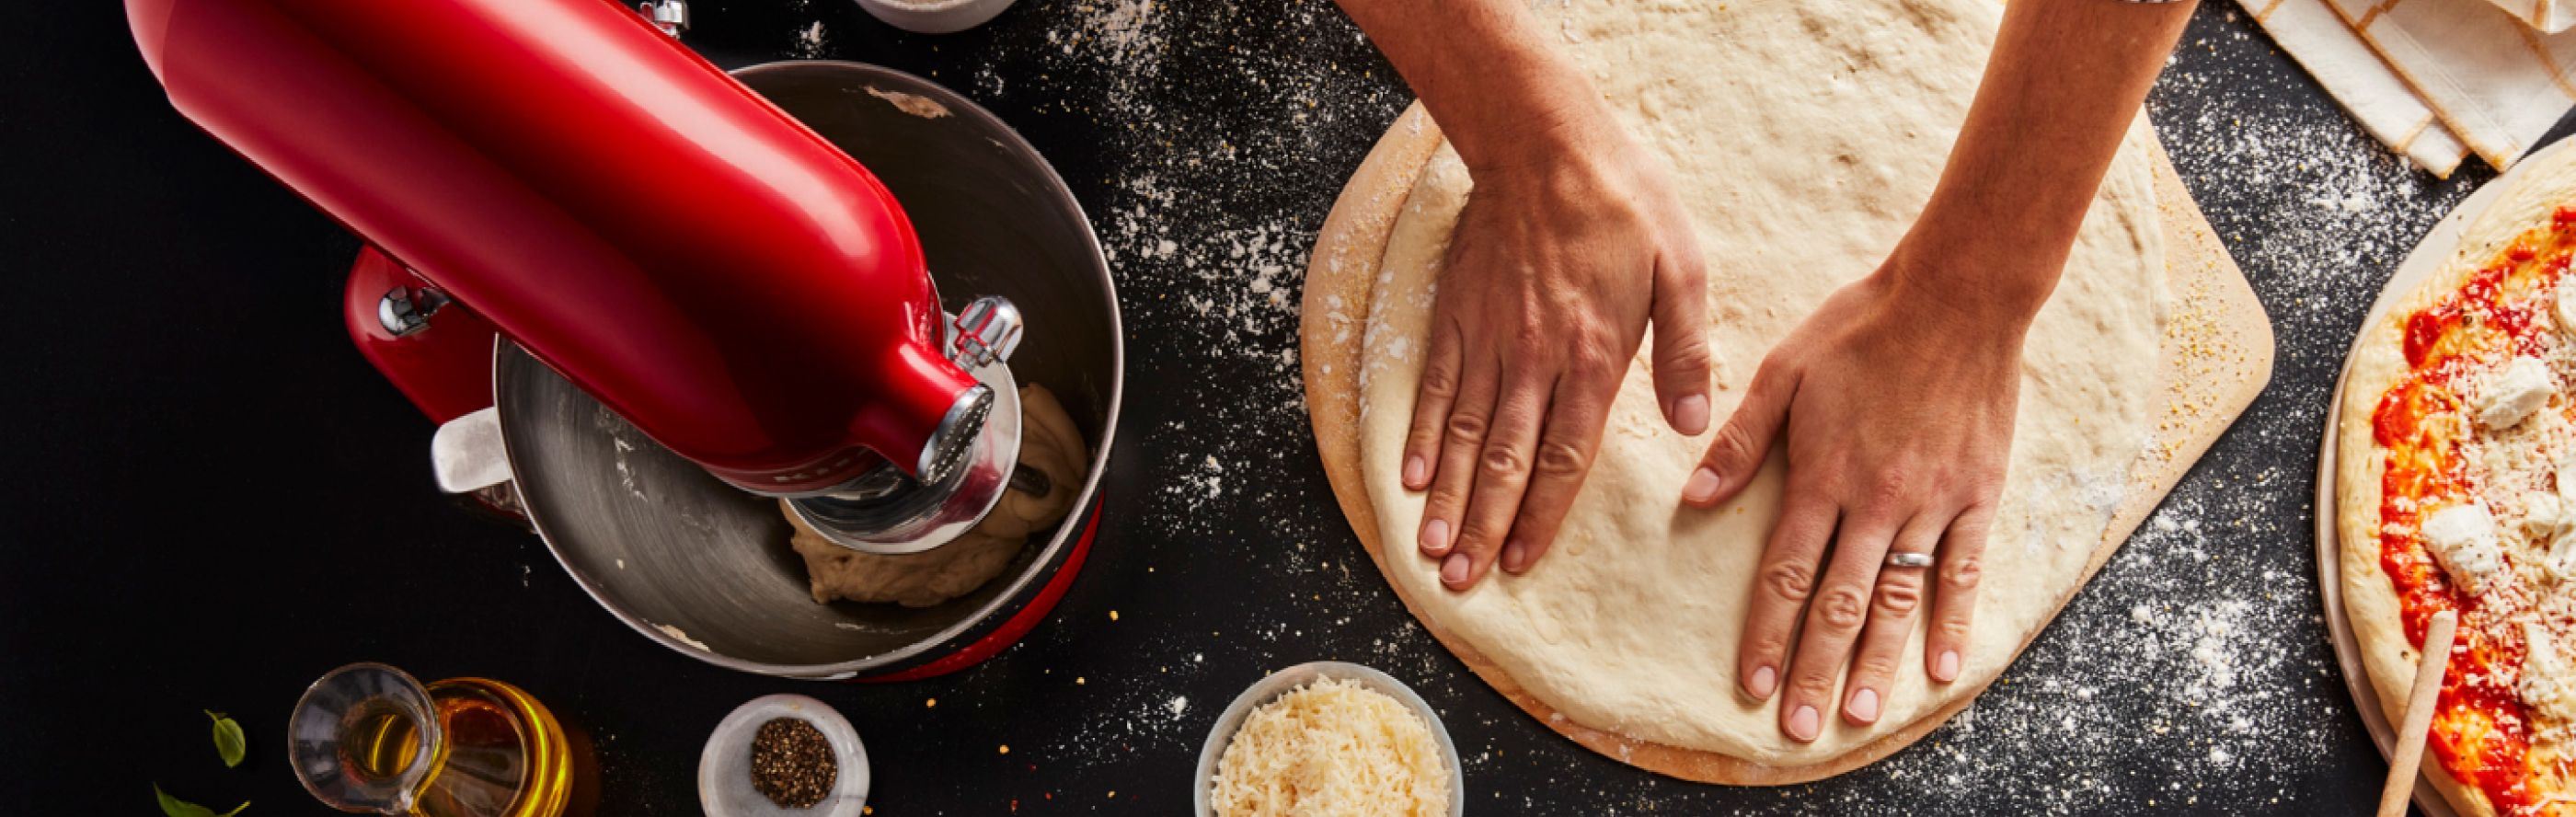 Maker flattening out pizza dough on countertop with KitchenAid® stand mixer and pizza ingredients